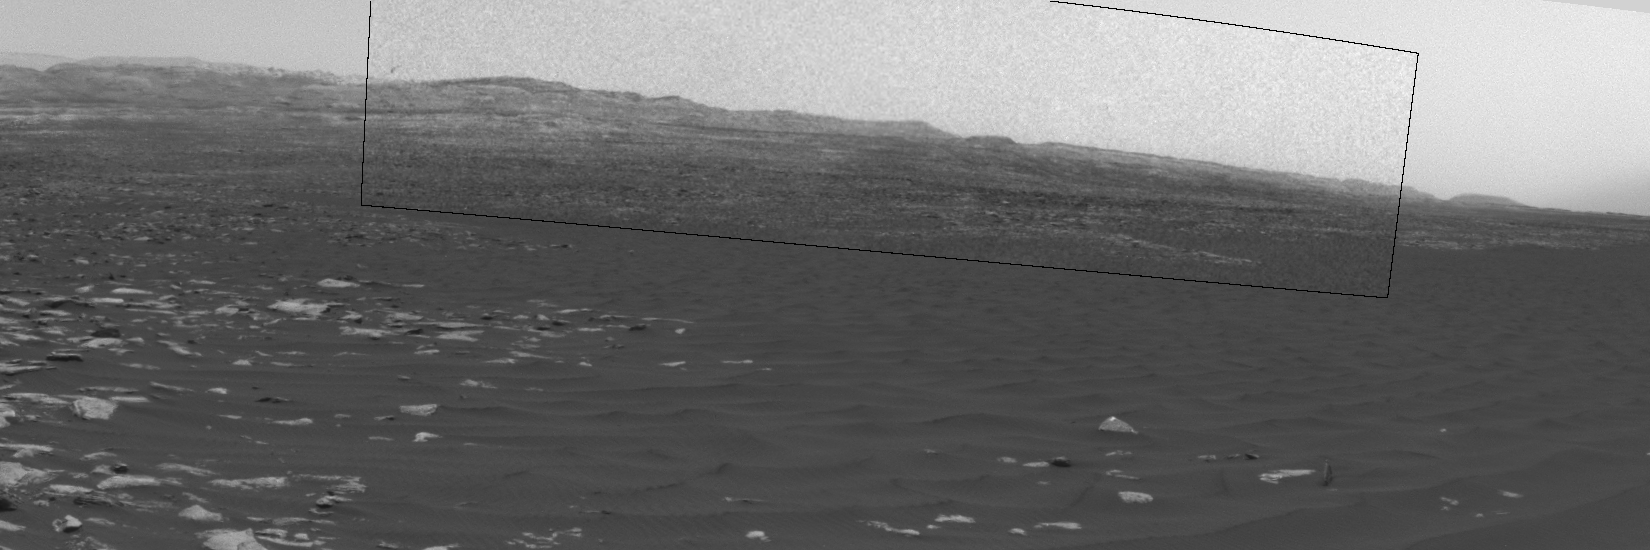 This sequence of images shows a dust devil on lower Mount Sharp inside Gale Crater, as viewed by NASA's Curiosity Mars Rover during the summer afternoon of Feb. 18, 2017.